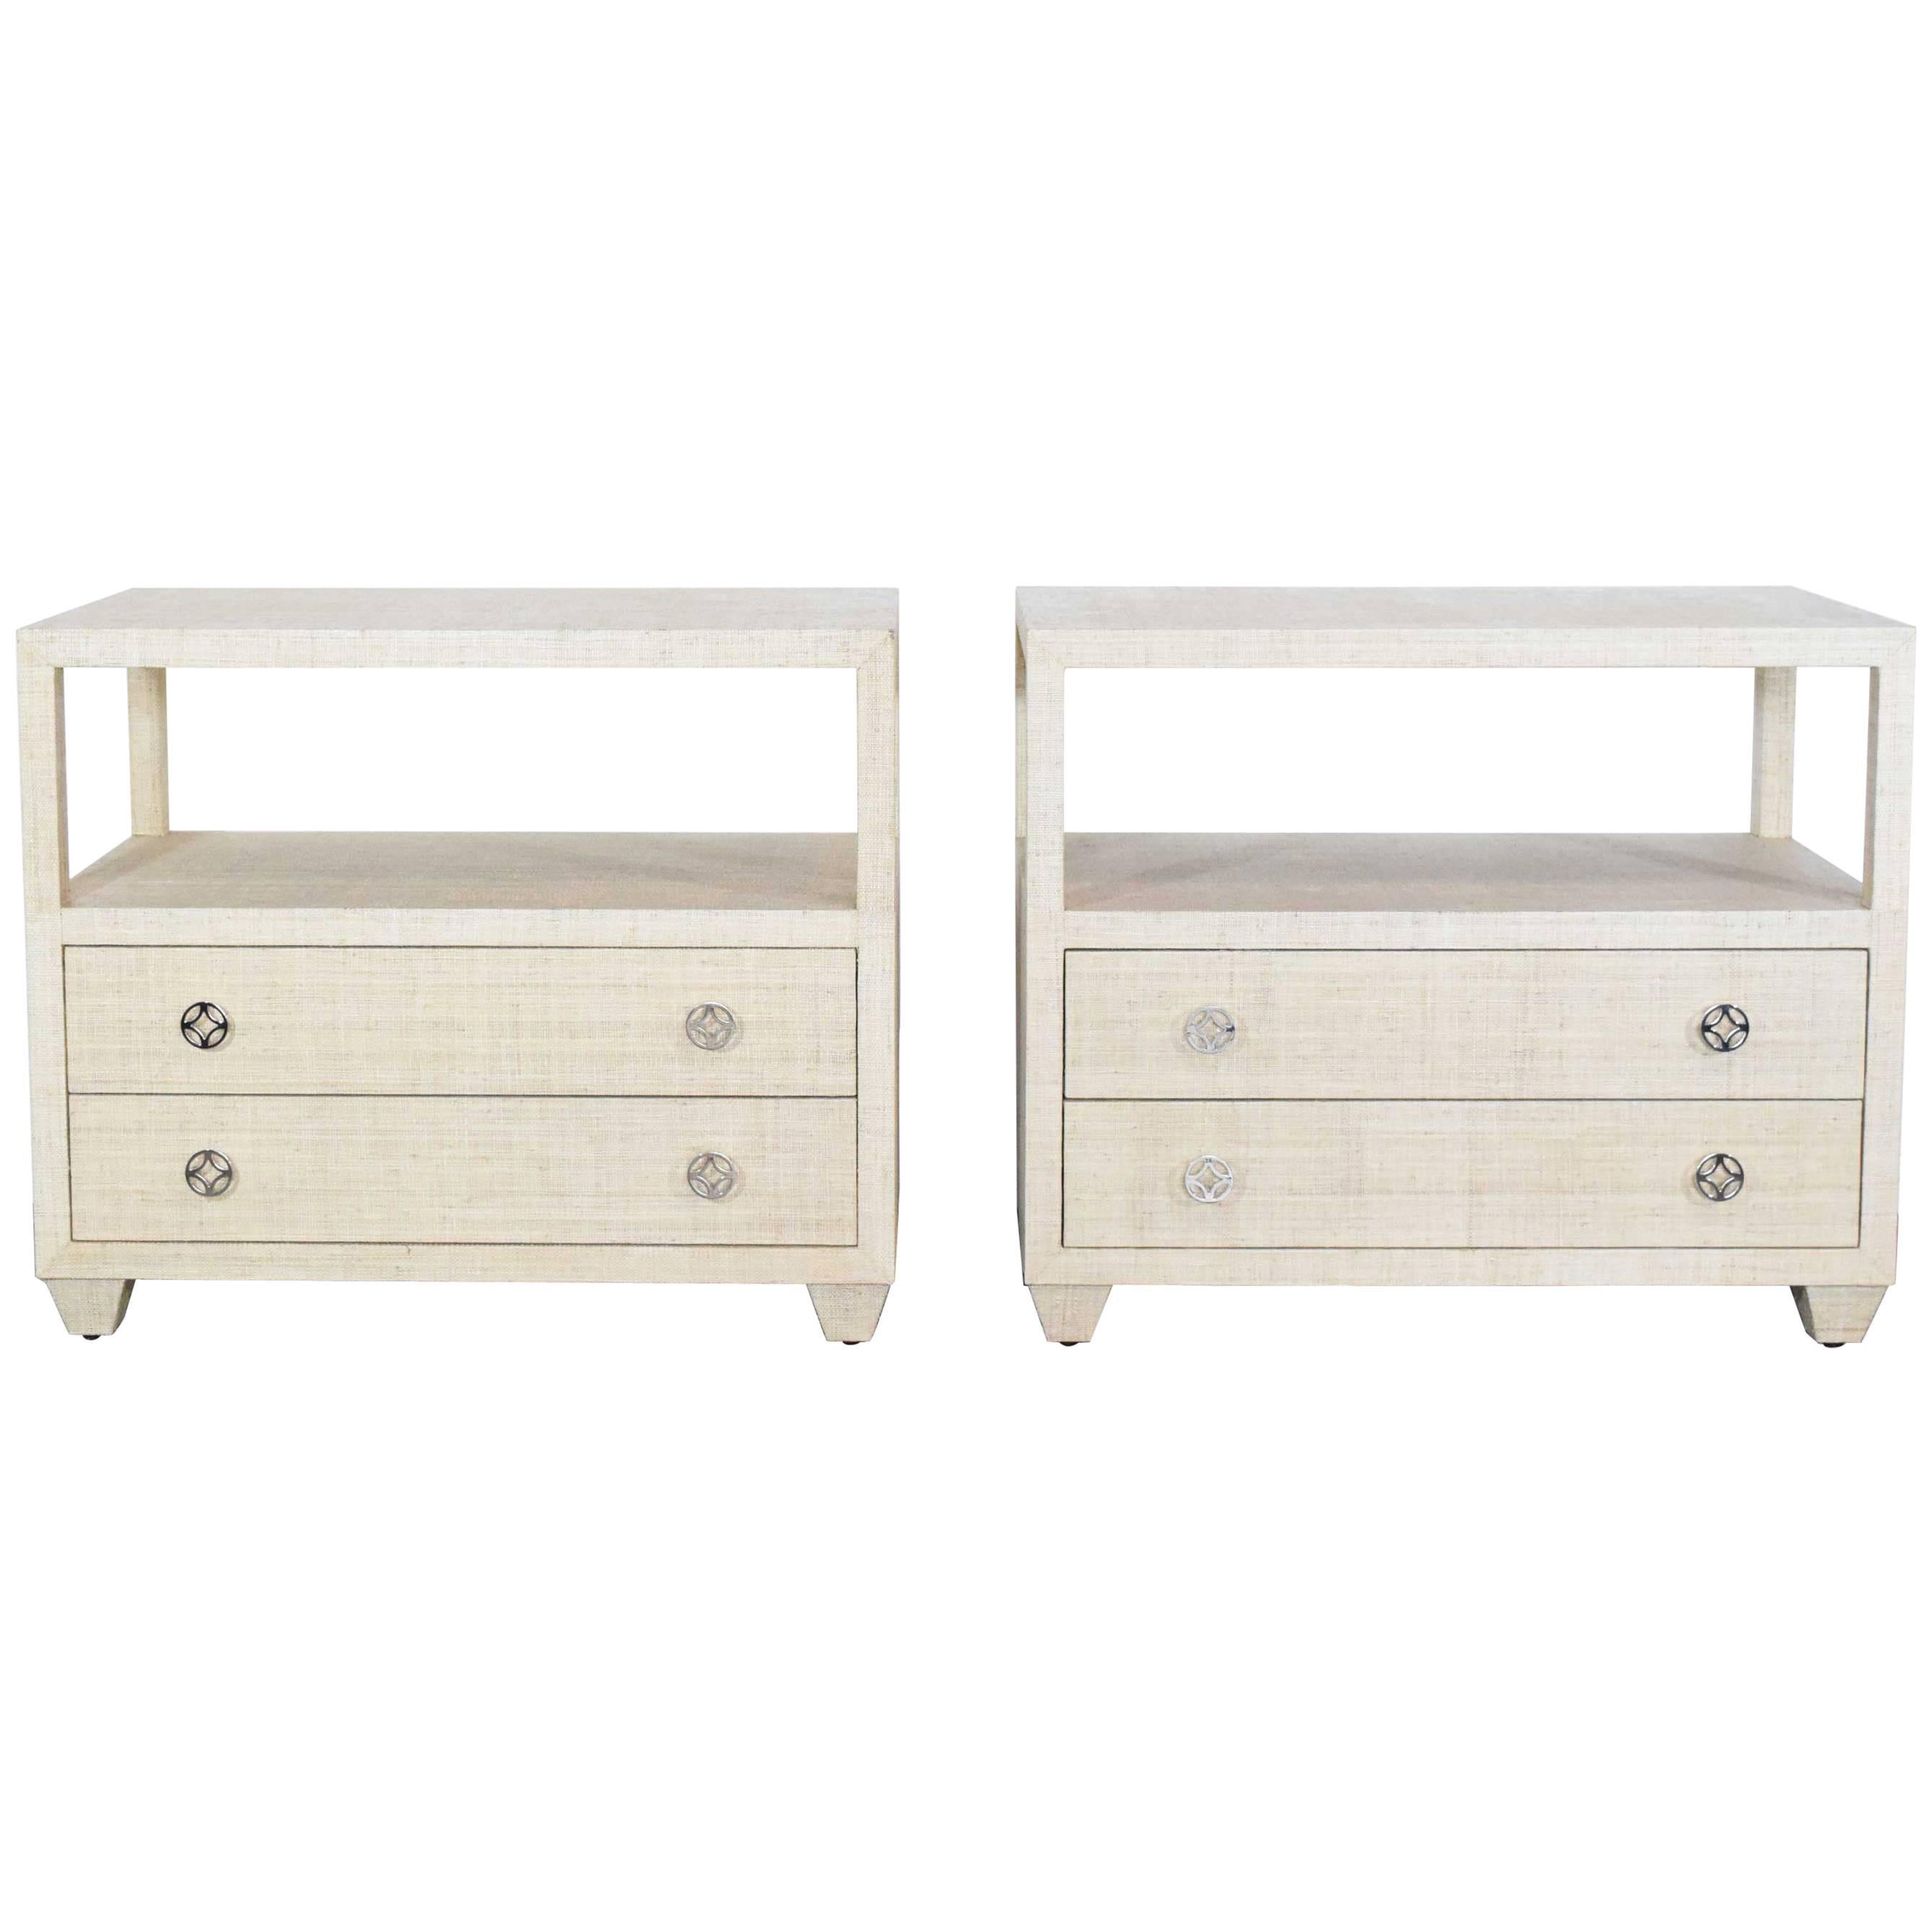 Pair of Grasscloth Nightstands or Chests by Bernhardt